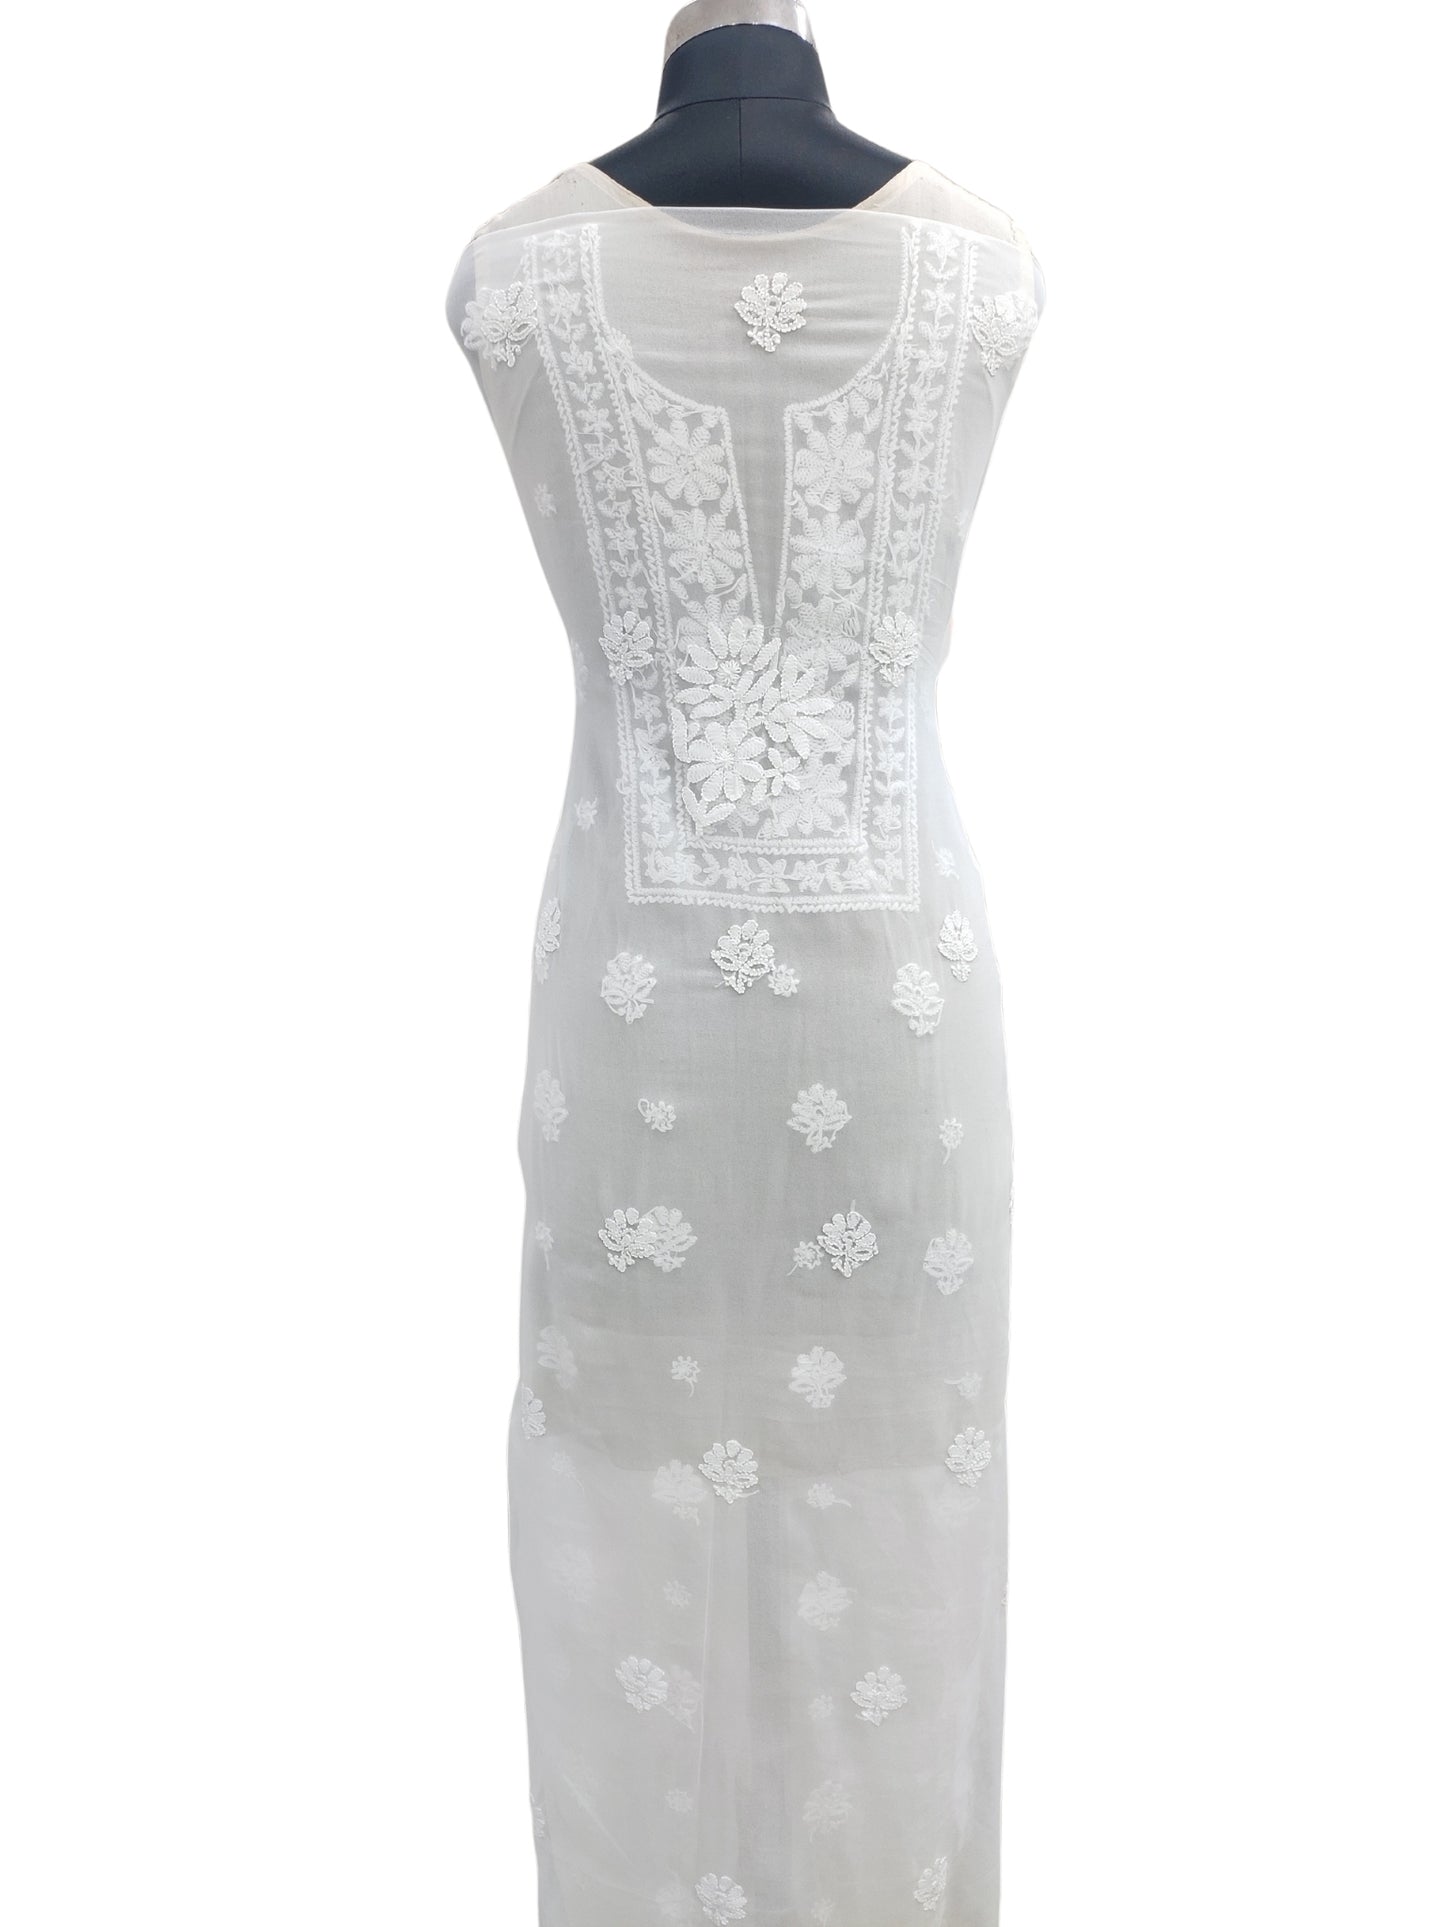 Shyamal Chikan Hand Embroidered White Georgette Lucknowi Chikankari Unstitched Suit Piece - S21943